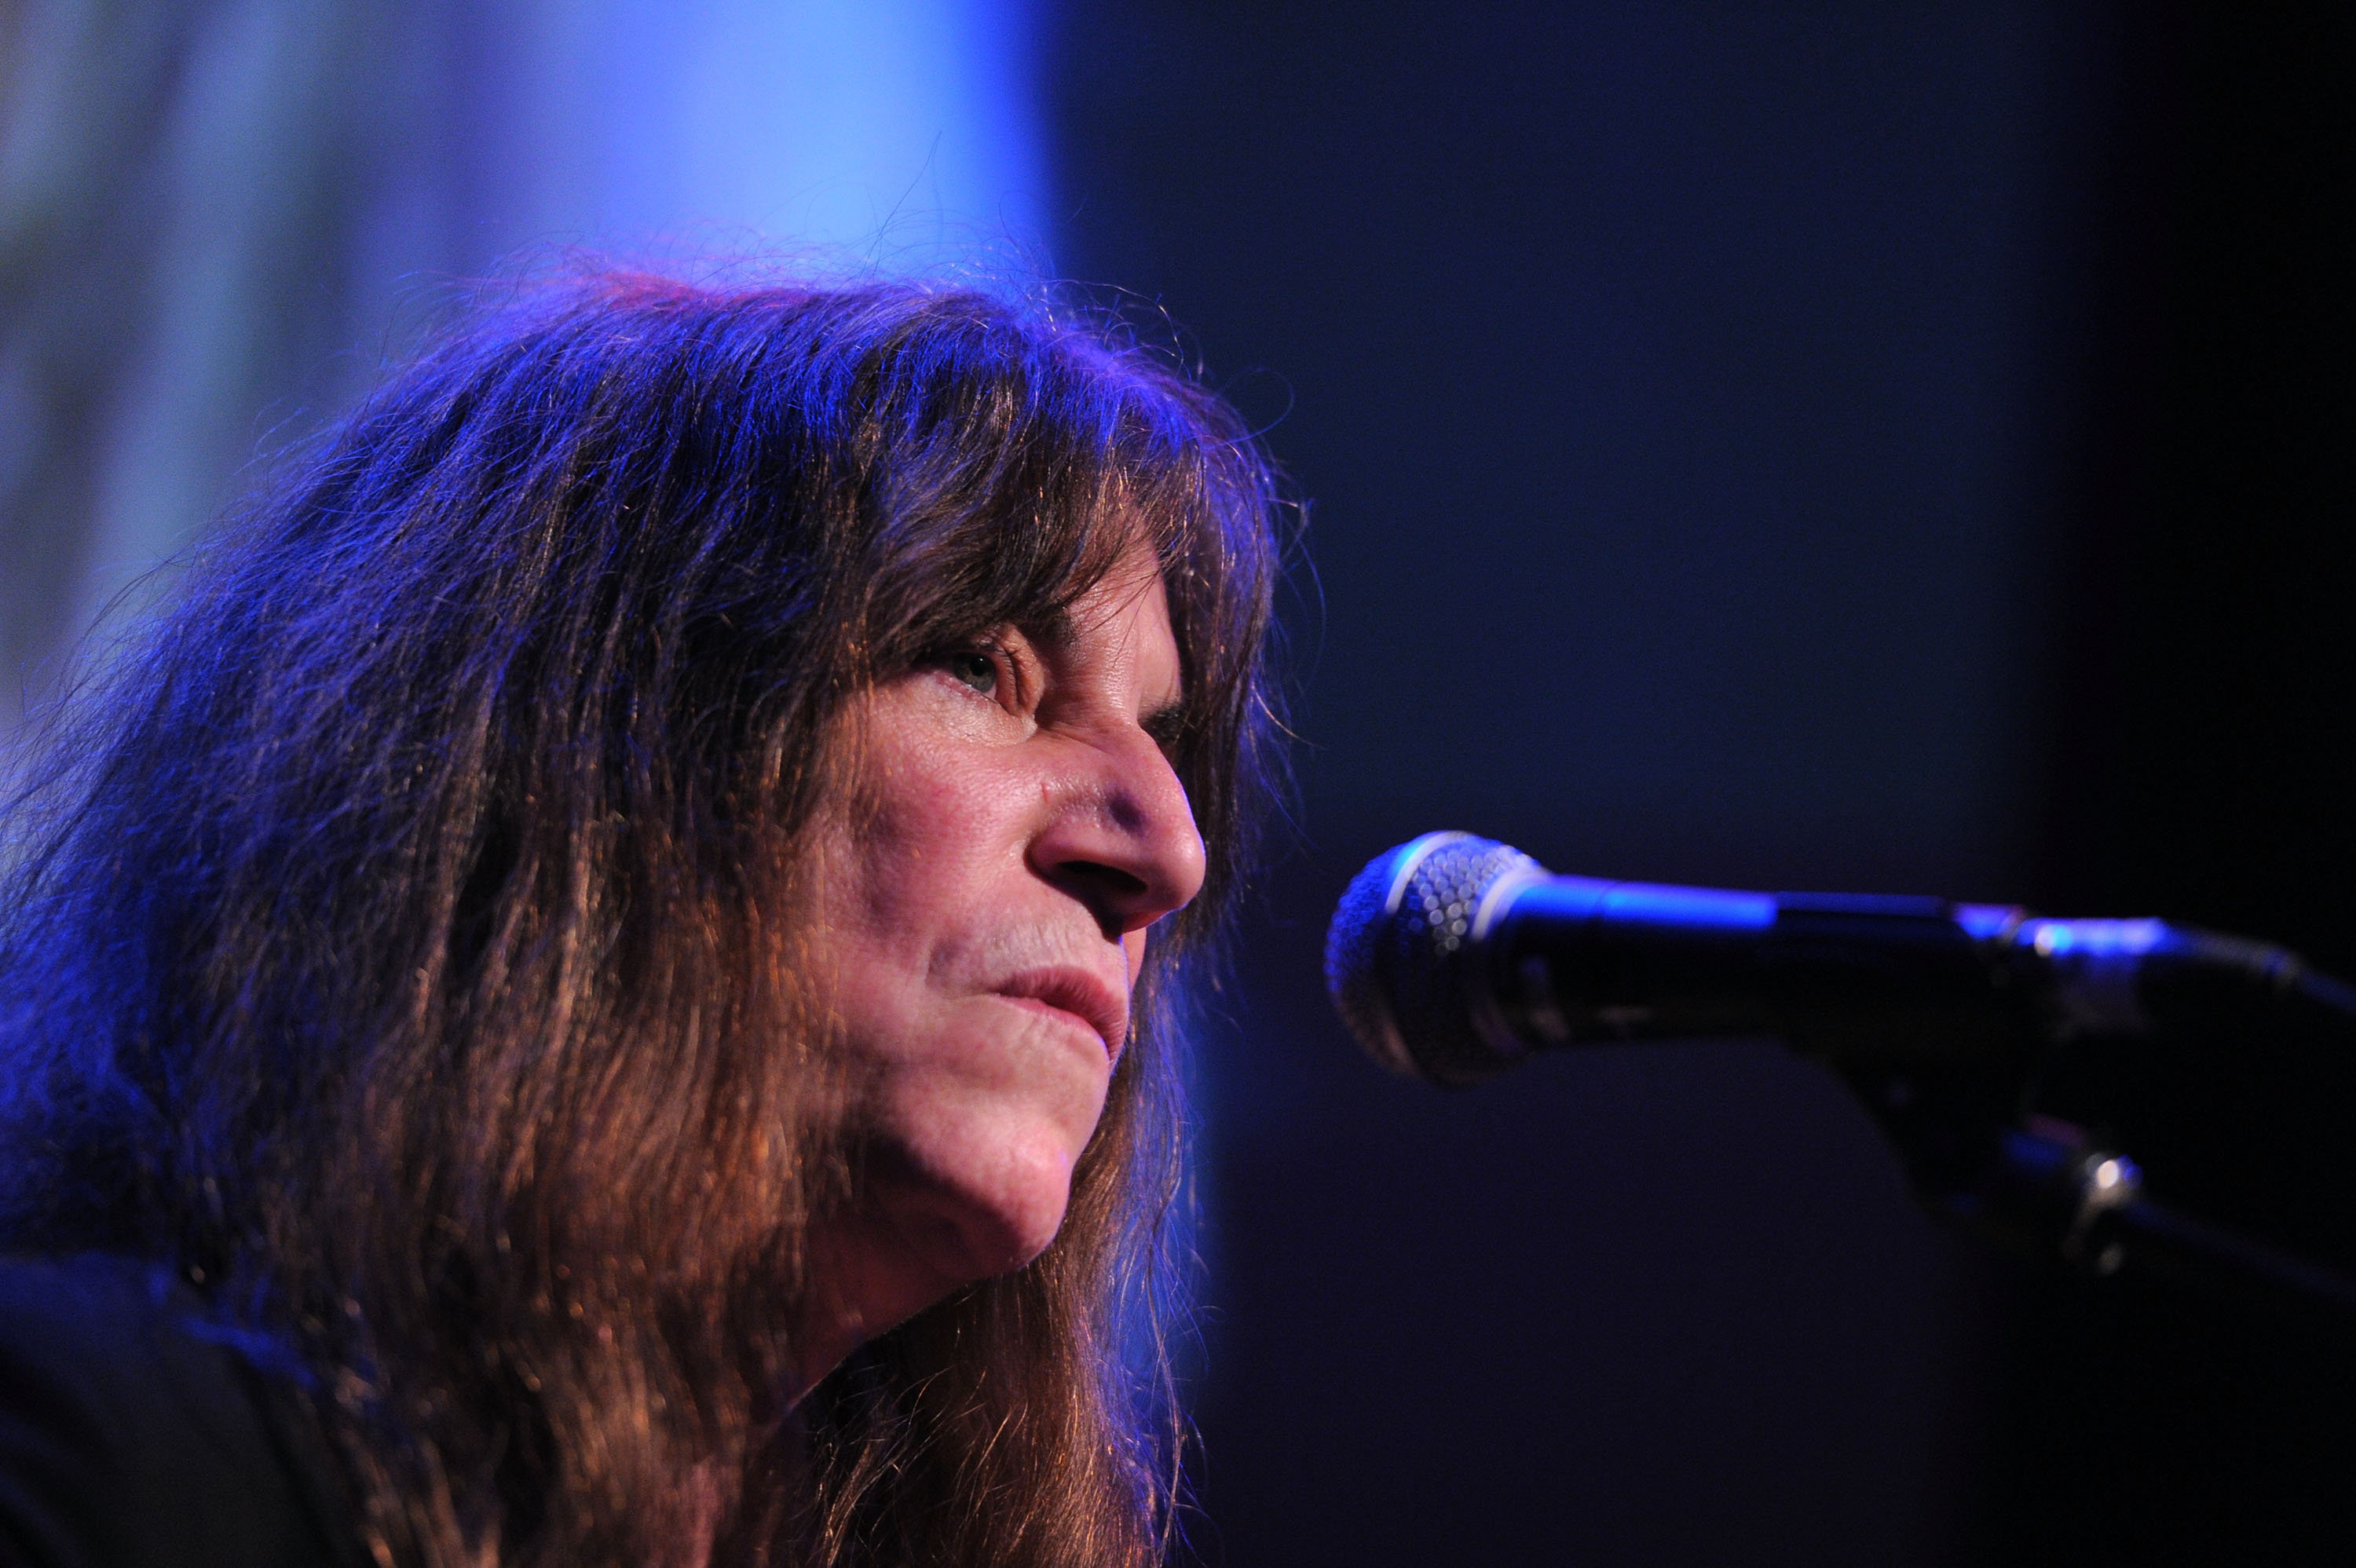 NEW YORK, NY - MAY 17: Musician Patti Smith performs onstage at the 2011 Joyful Heart Foundation Gala at The Museum of Modern Art on May 17, 2011 in New York City. (Photo by Mike Coppola/Getty Images)